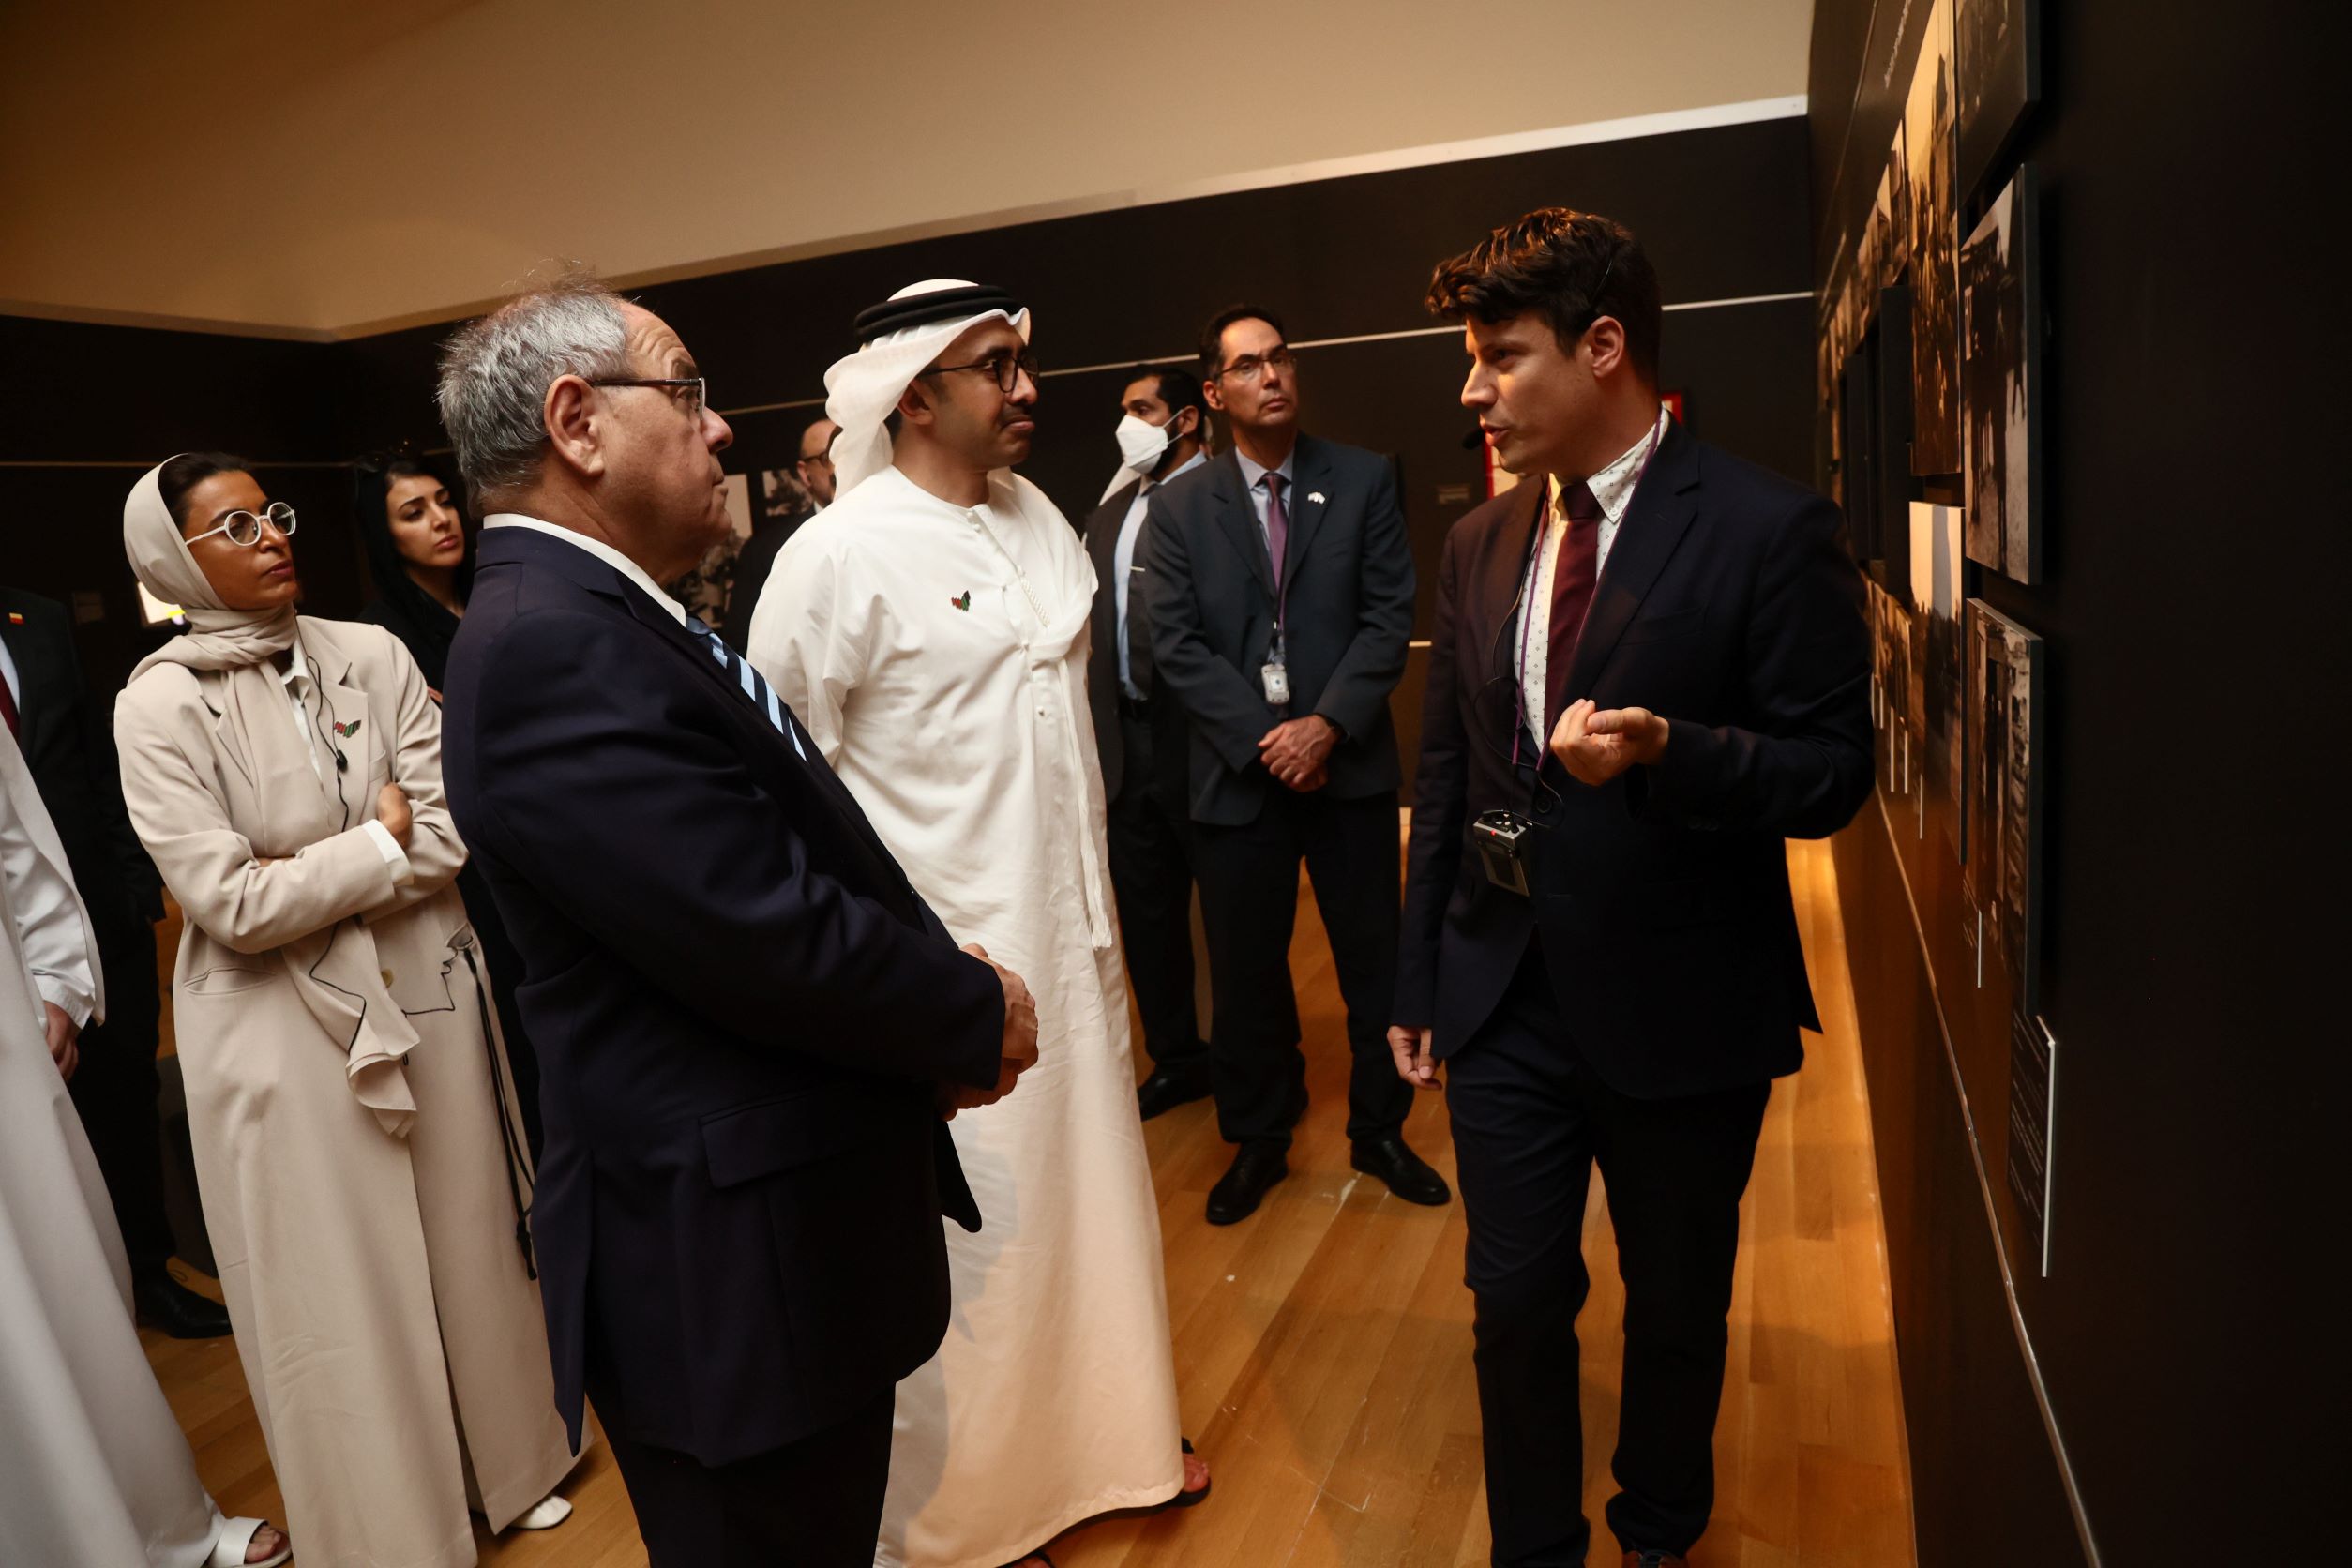 Ministers from the UAE visit Yad Vashem, the World Holocaust Remembrance Center, in Jerusalem